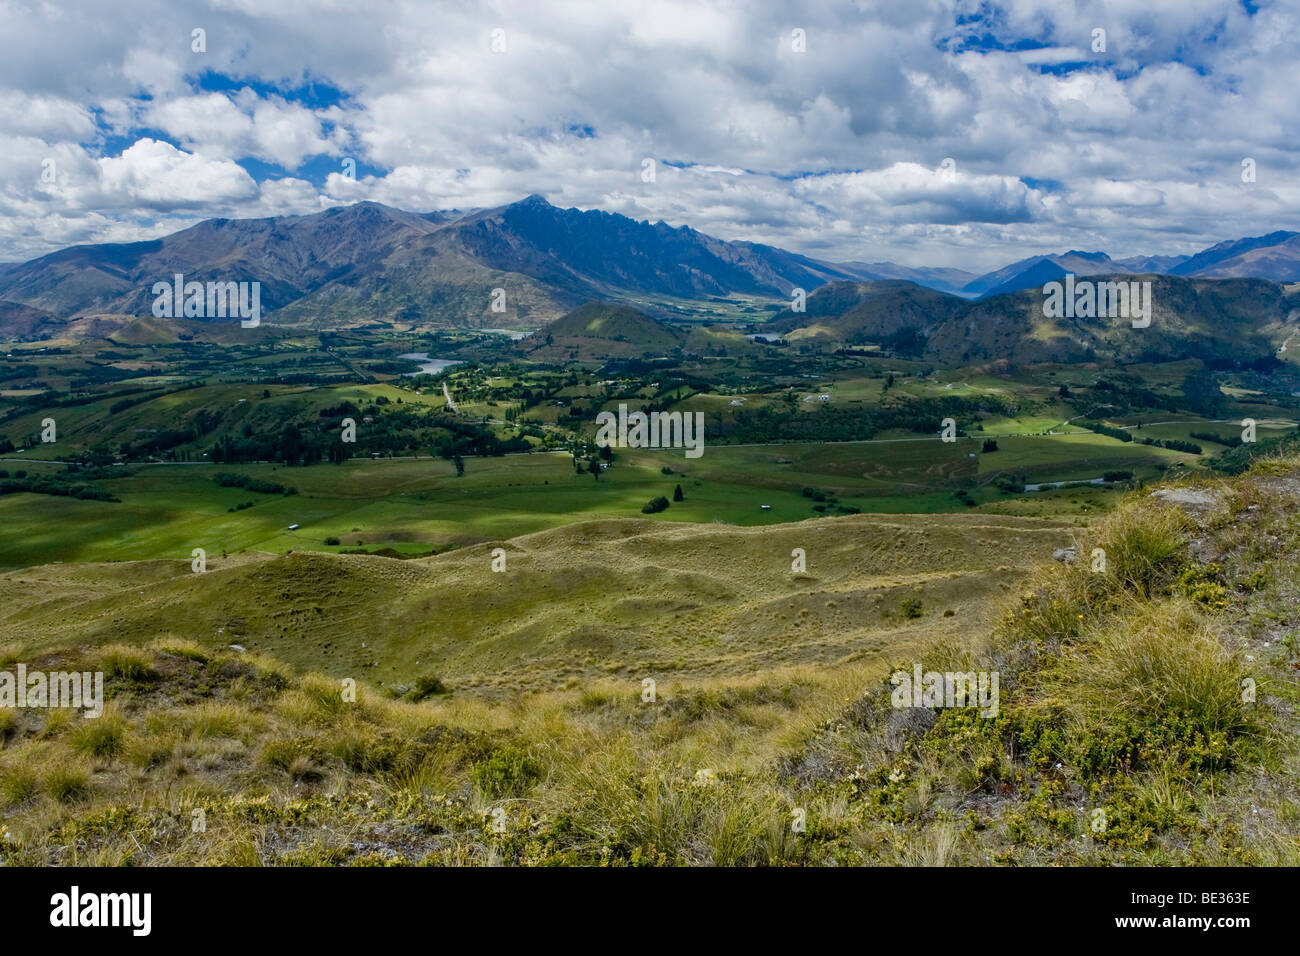 Overlooking the valley of Frankton, Queenstown, Otago, South Island, New Zealand Stock Photo